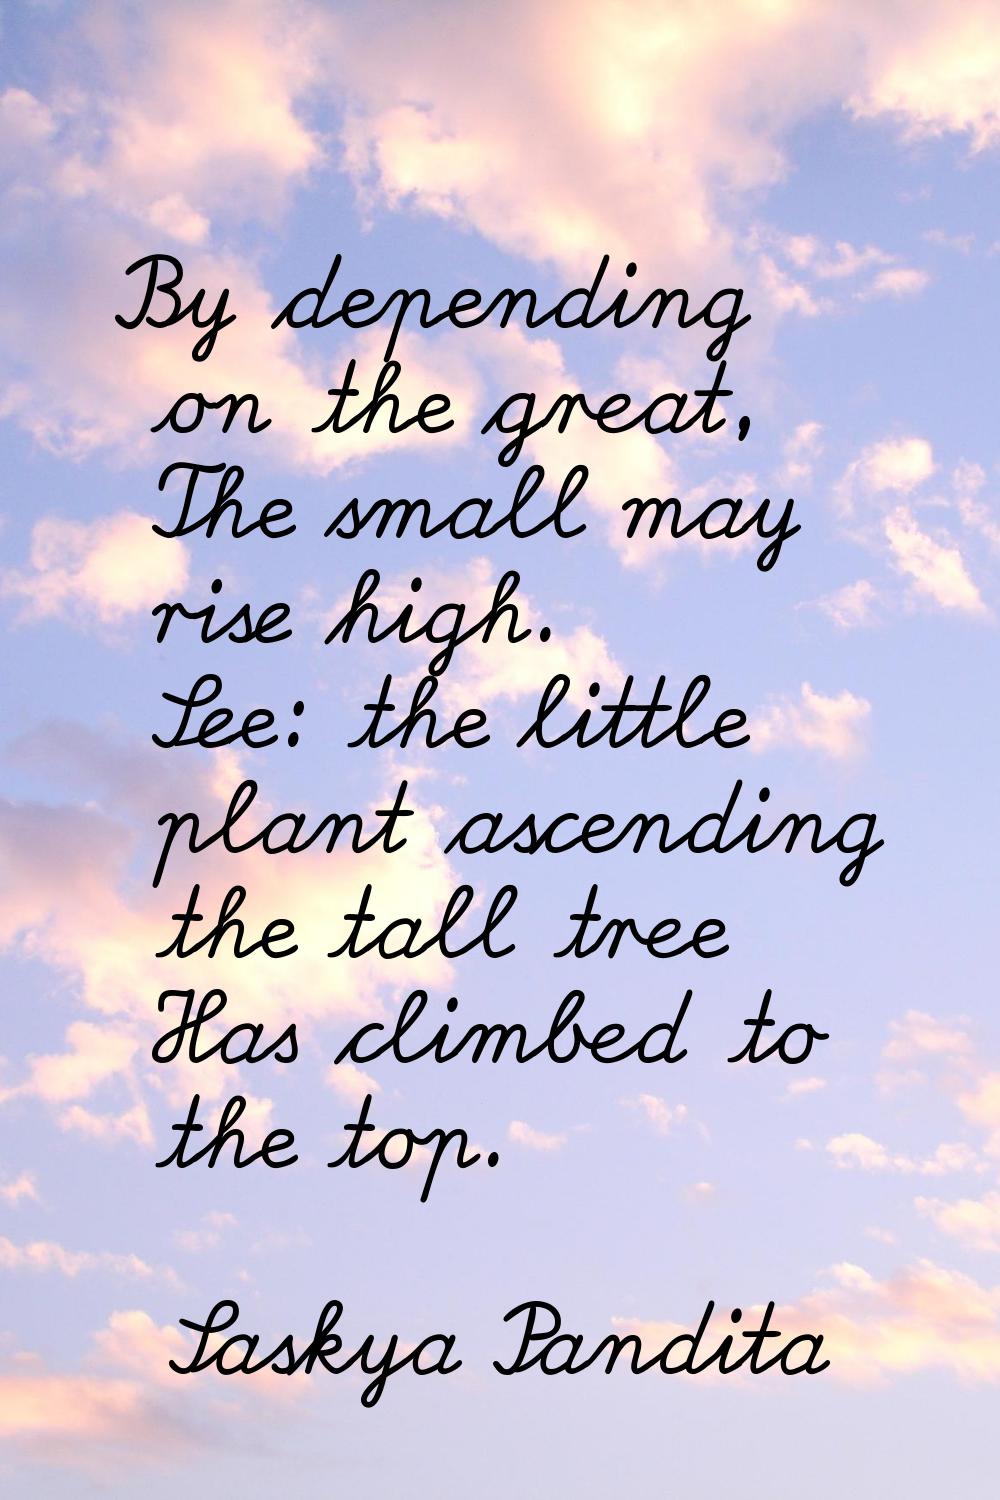 By depending on the great, The small may rise high. See: the little plant ascending the tall tree H